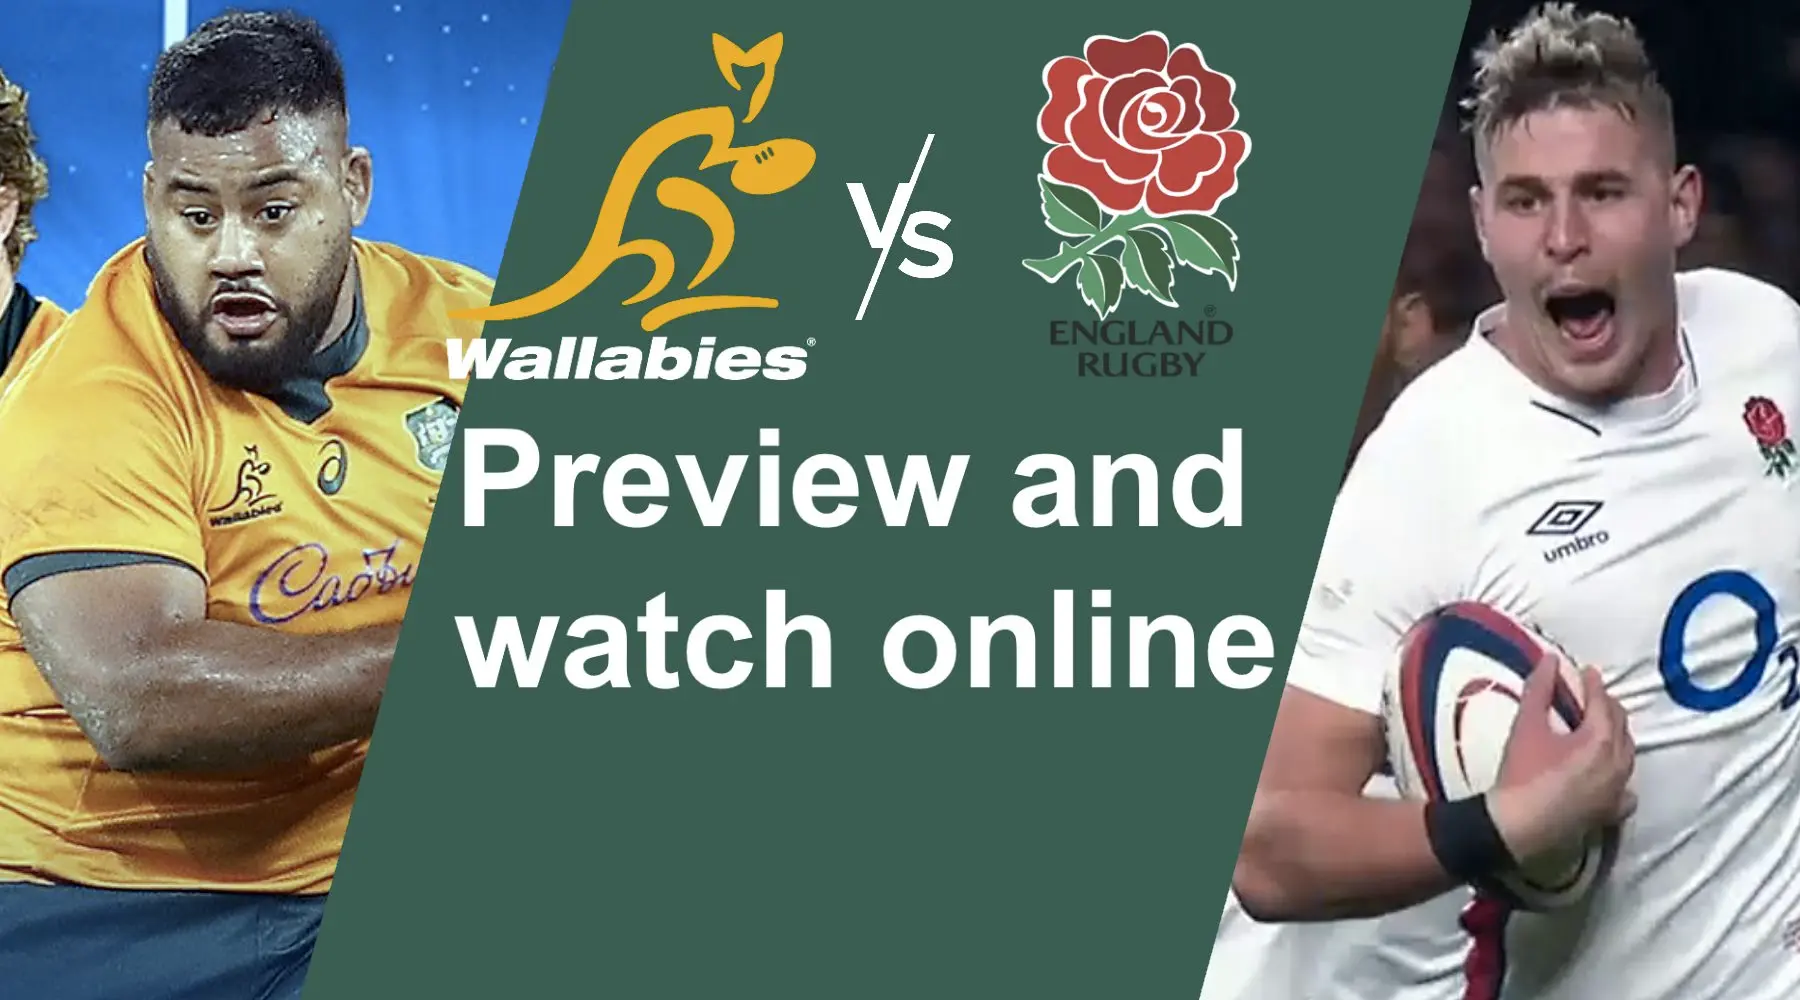 Wallabies vs England How to watch rugby live and free online in Australia